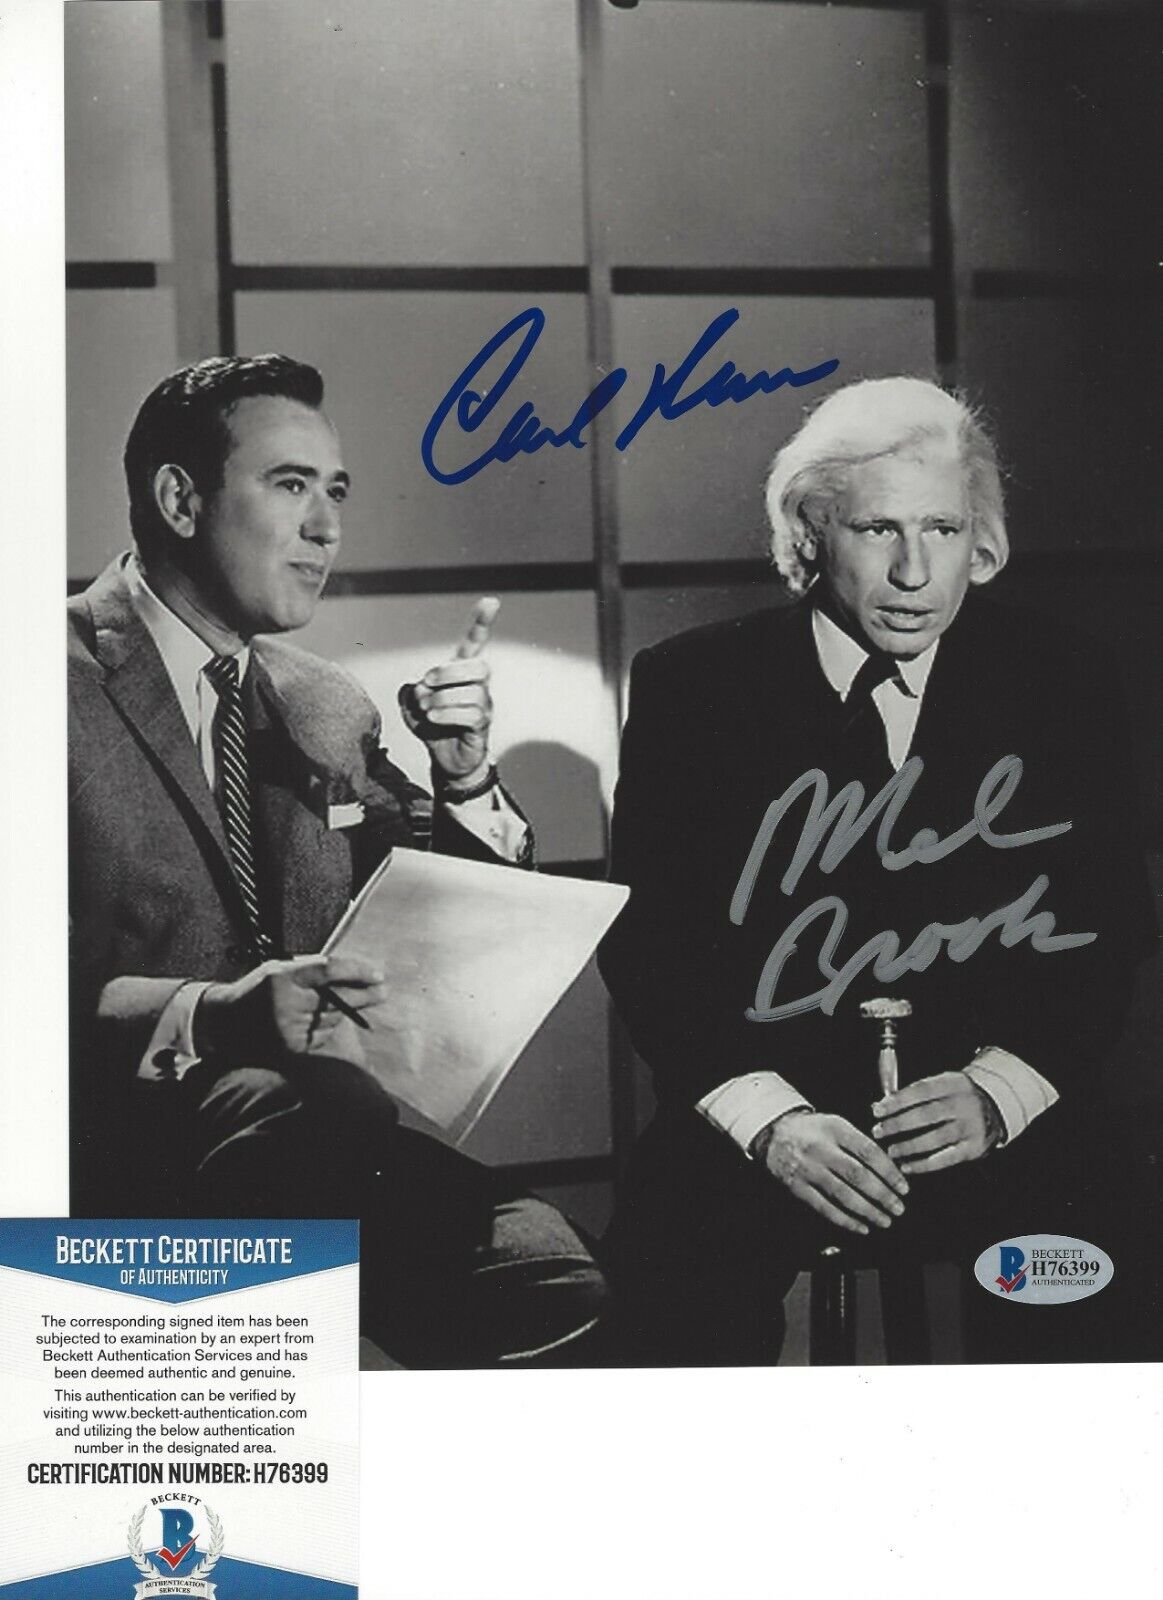 MEL BROOKS & CARL REINER SIGNED 8x10 Photo Poster painting BECKETT COA COMEDY LEGENDS DUO